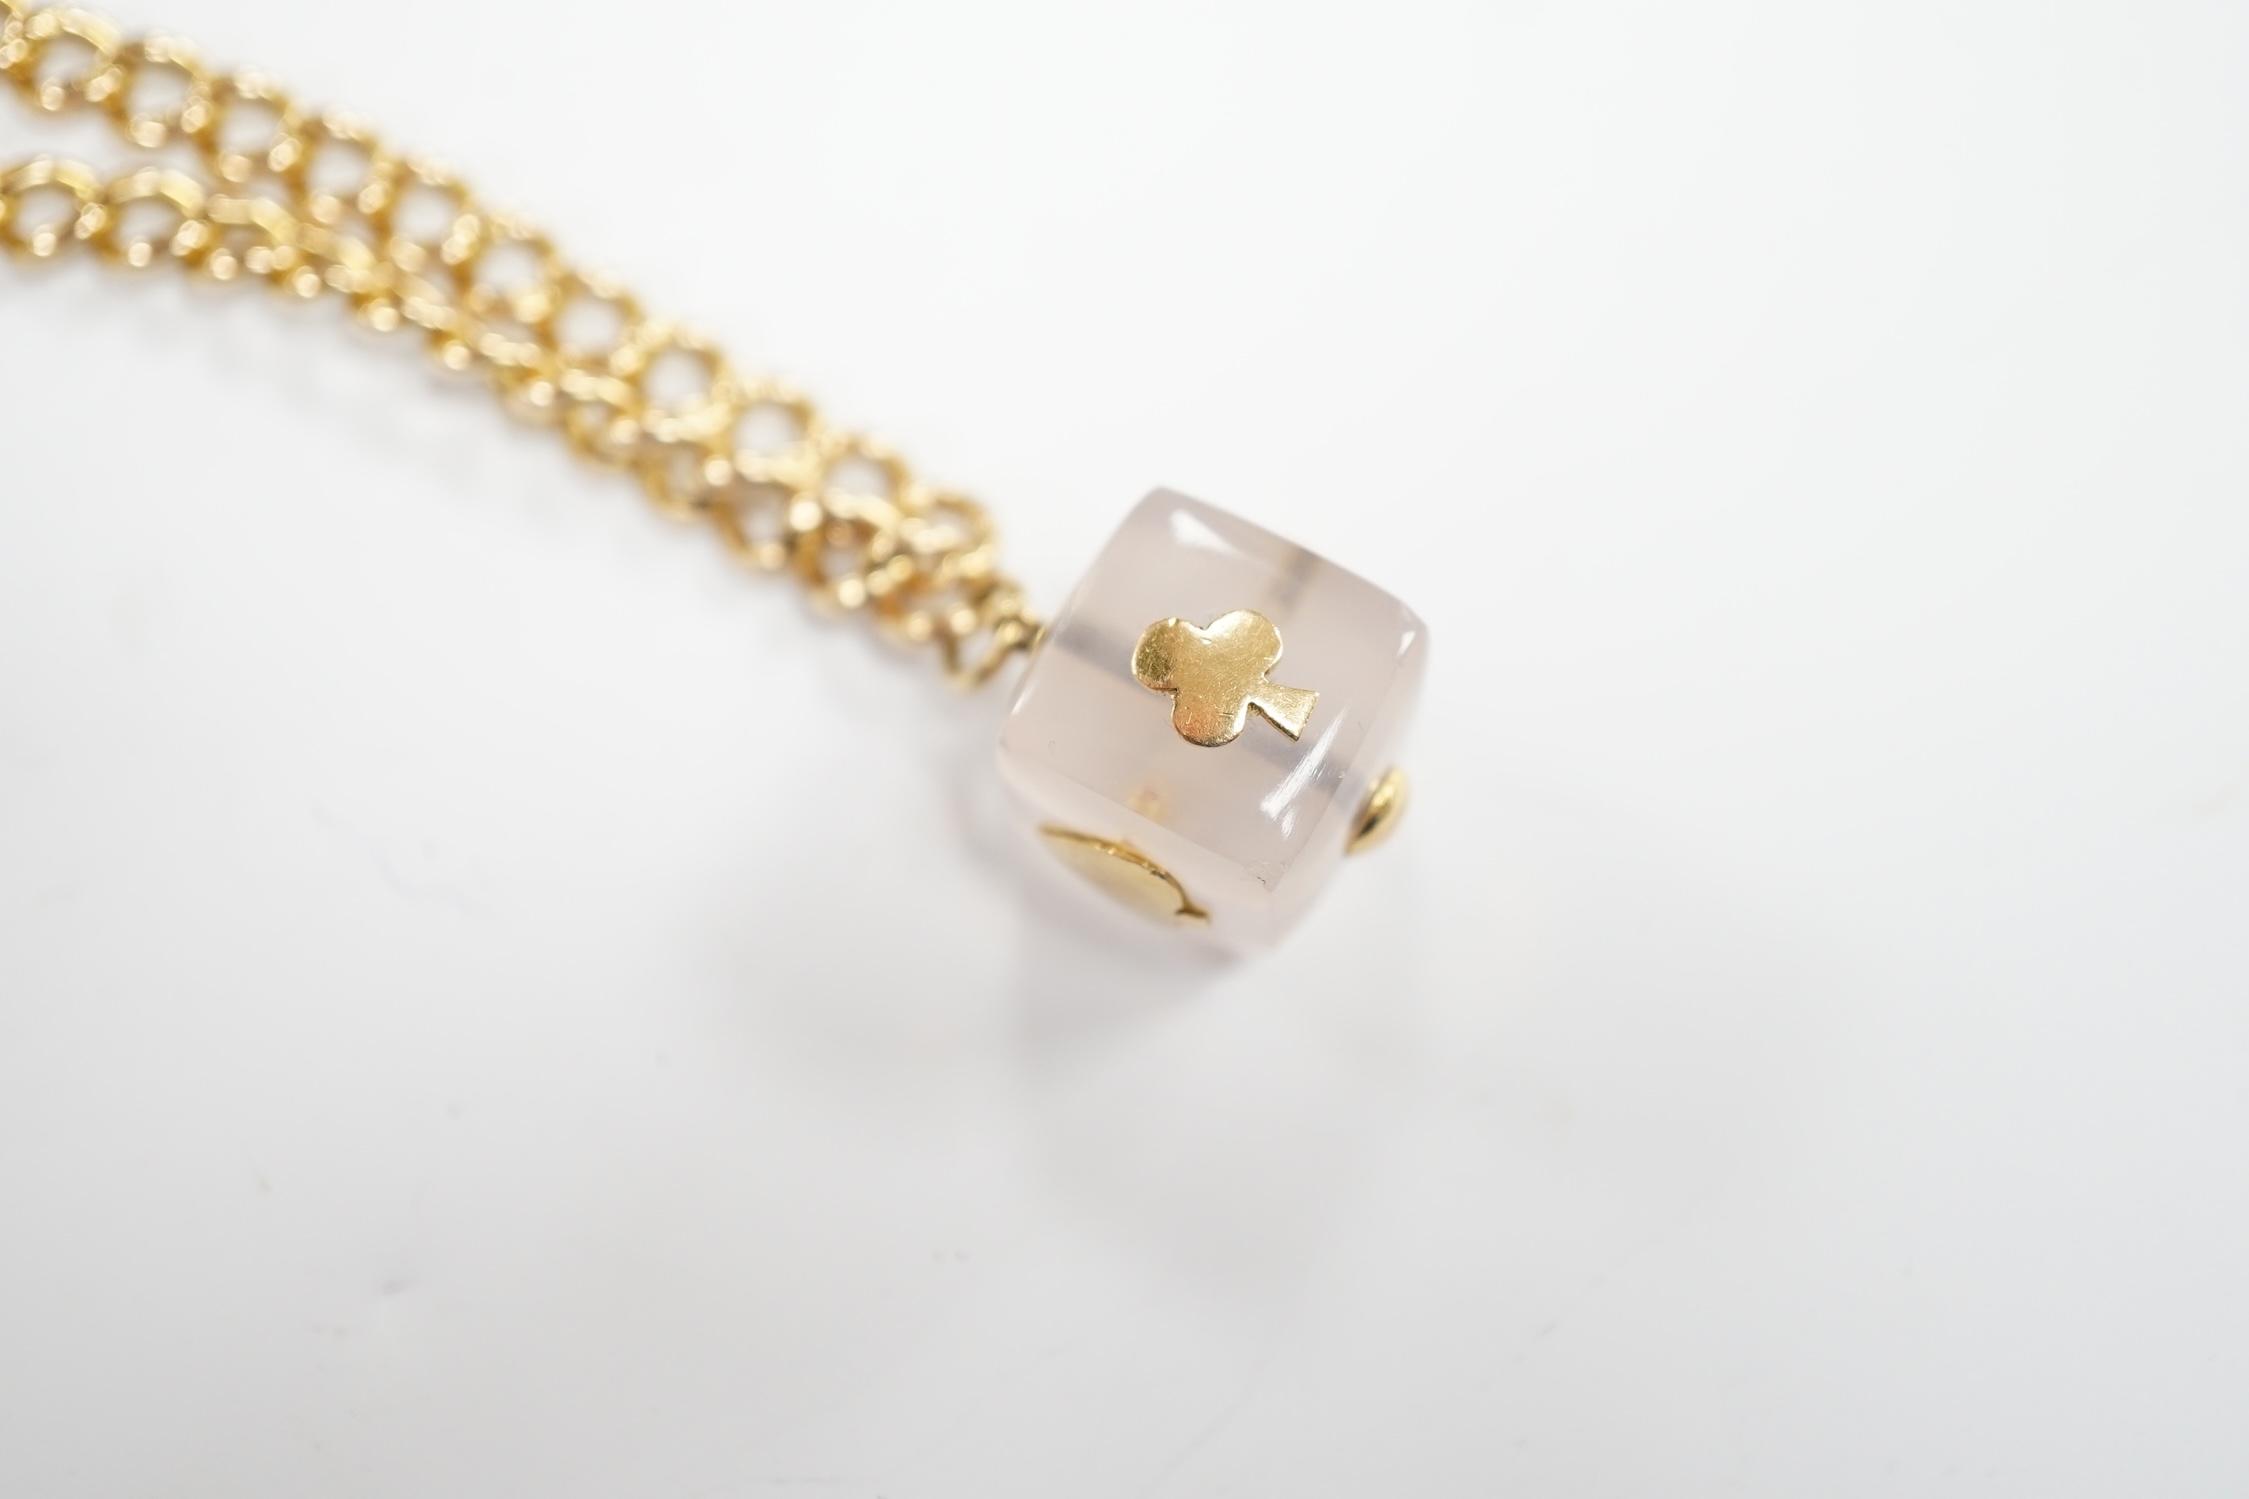 An Edwardian 15ct gold curb link bracelet, 16cm, hung with a later mounted glass cube charm, gross weight 20.8 grams.